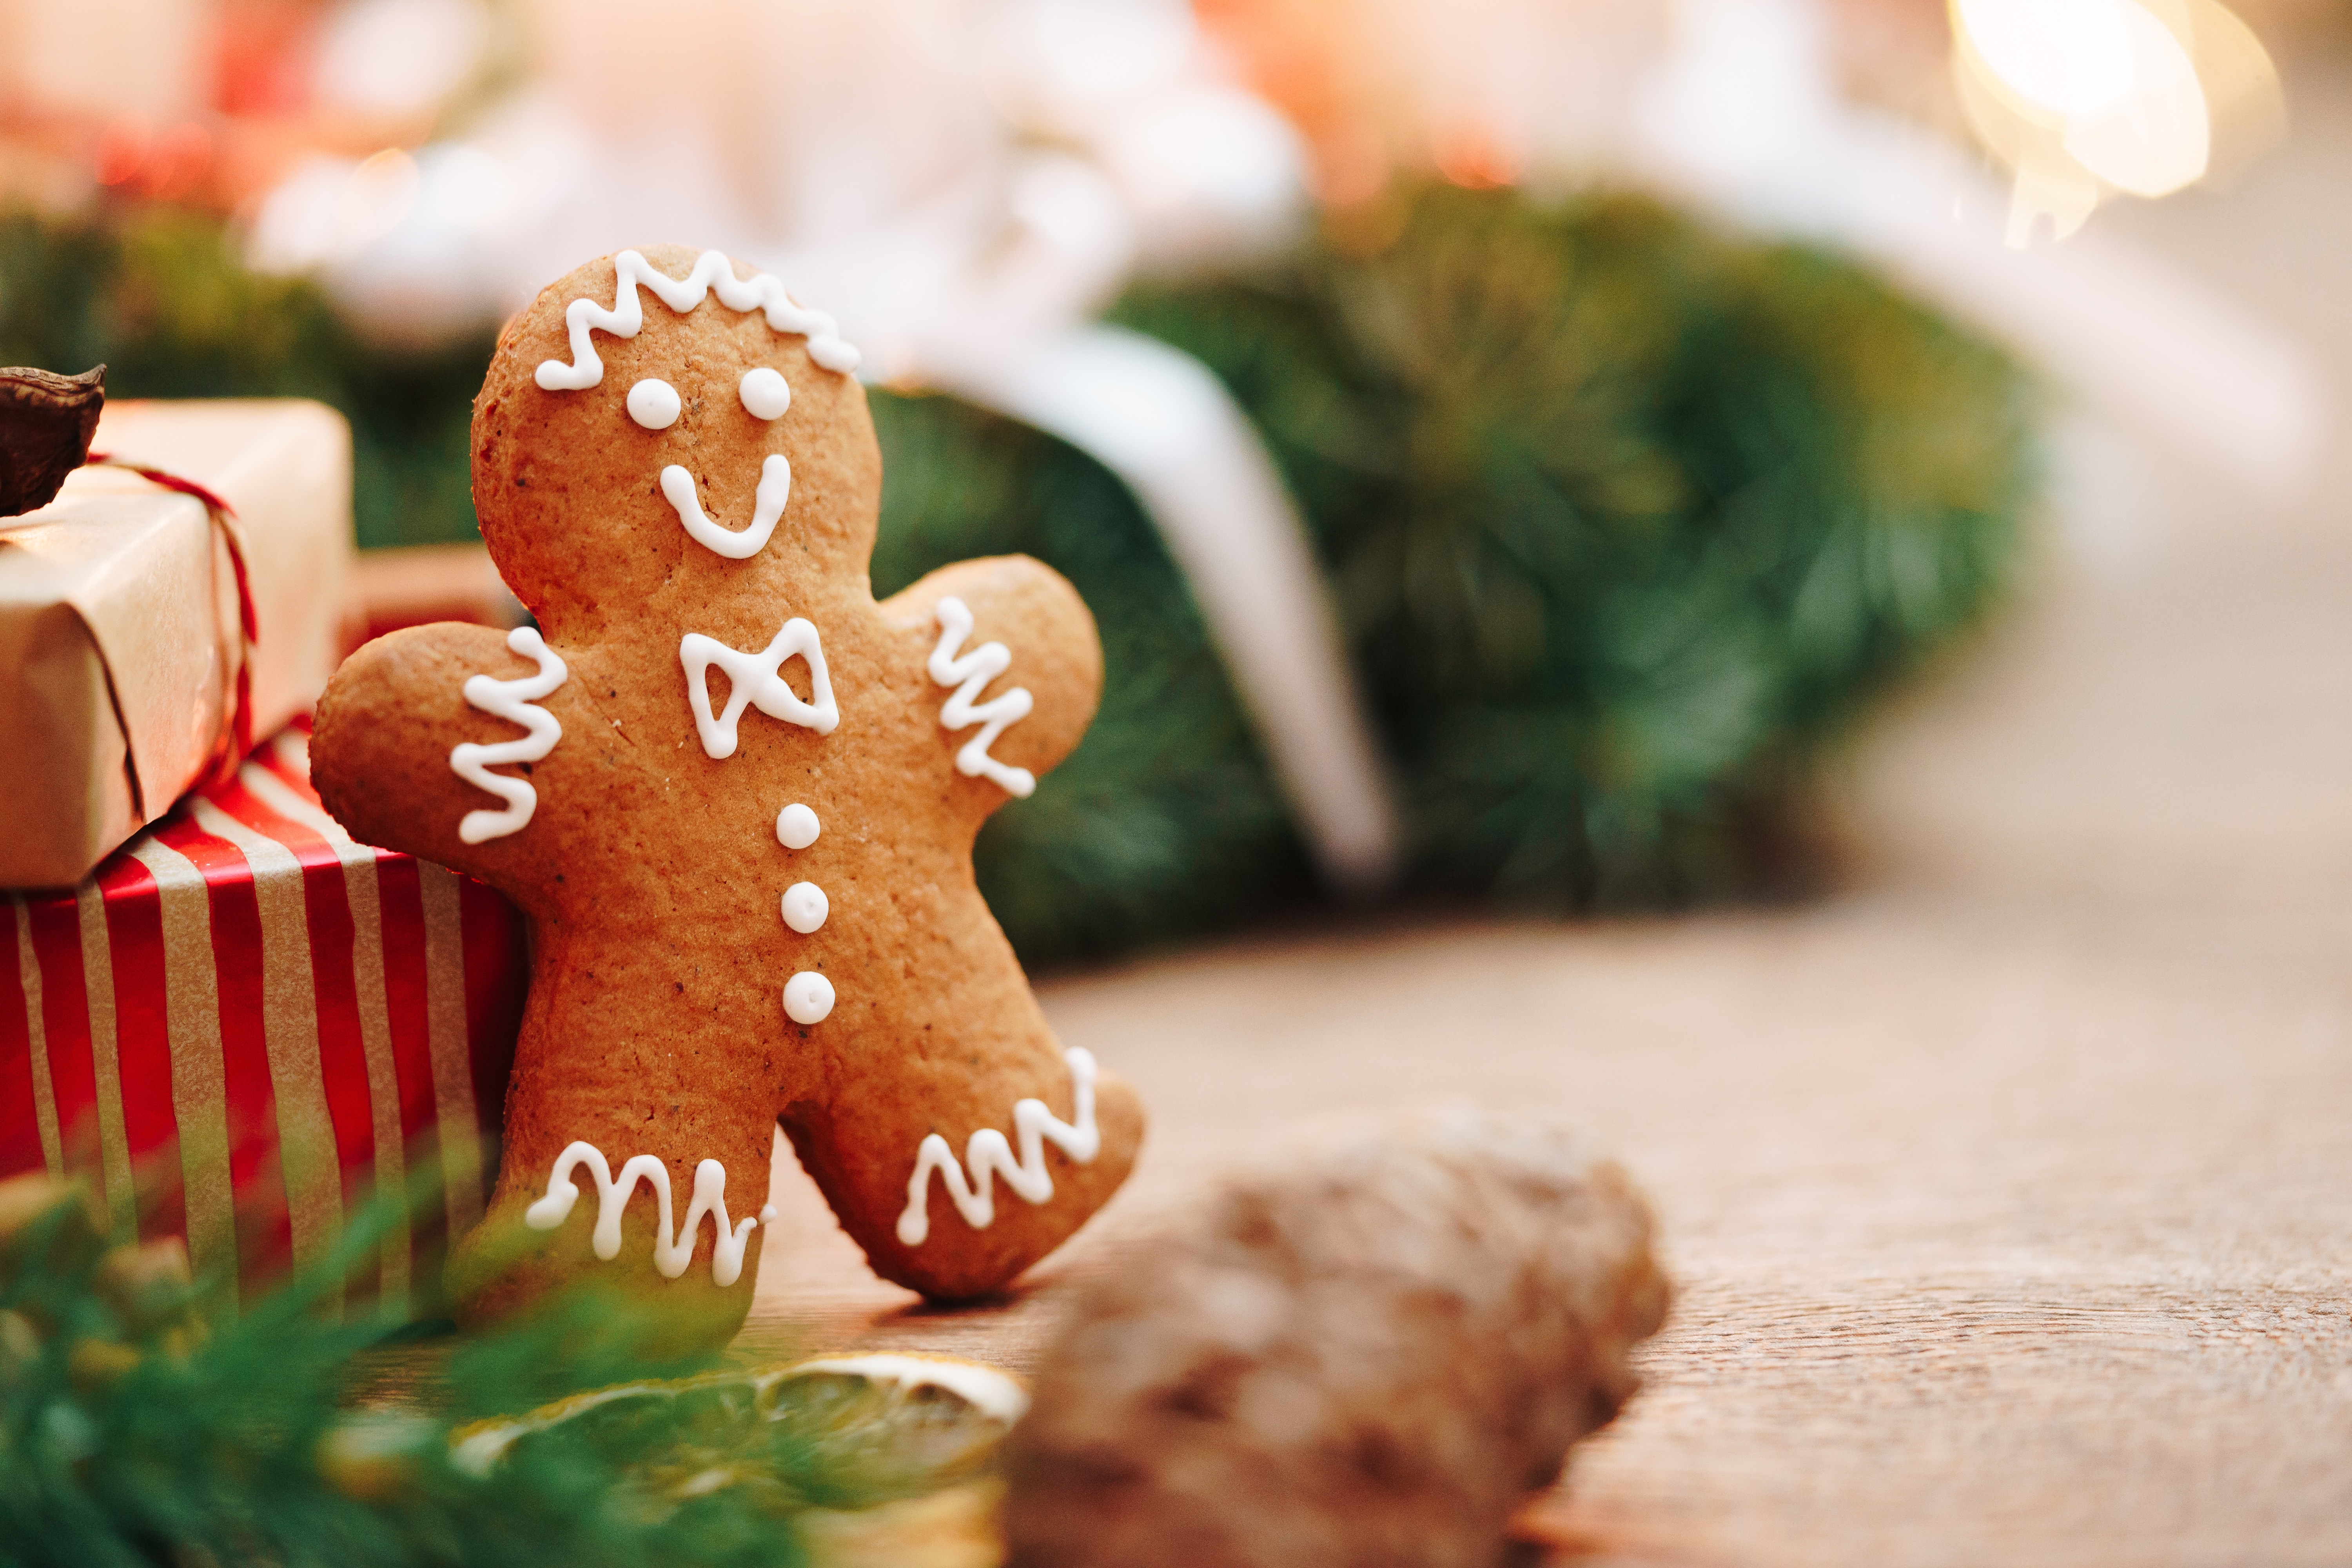 Gingerbread man with holiday decor